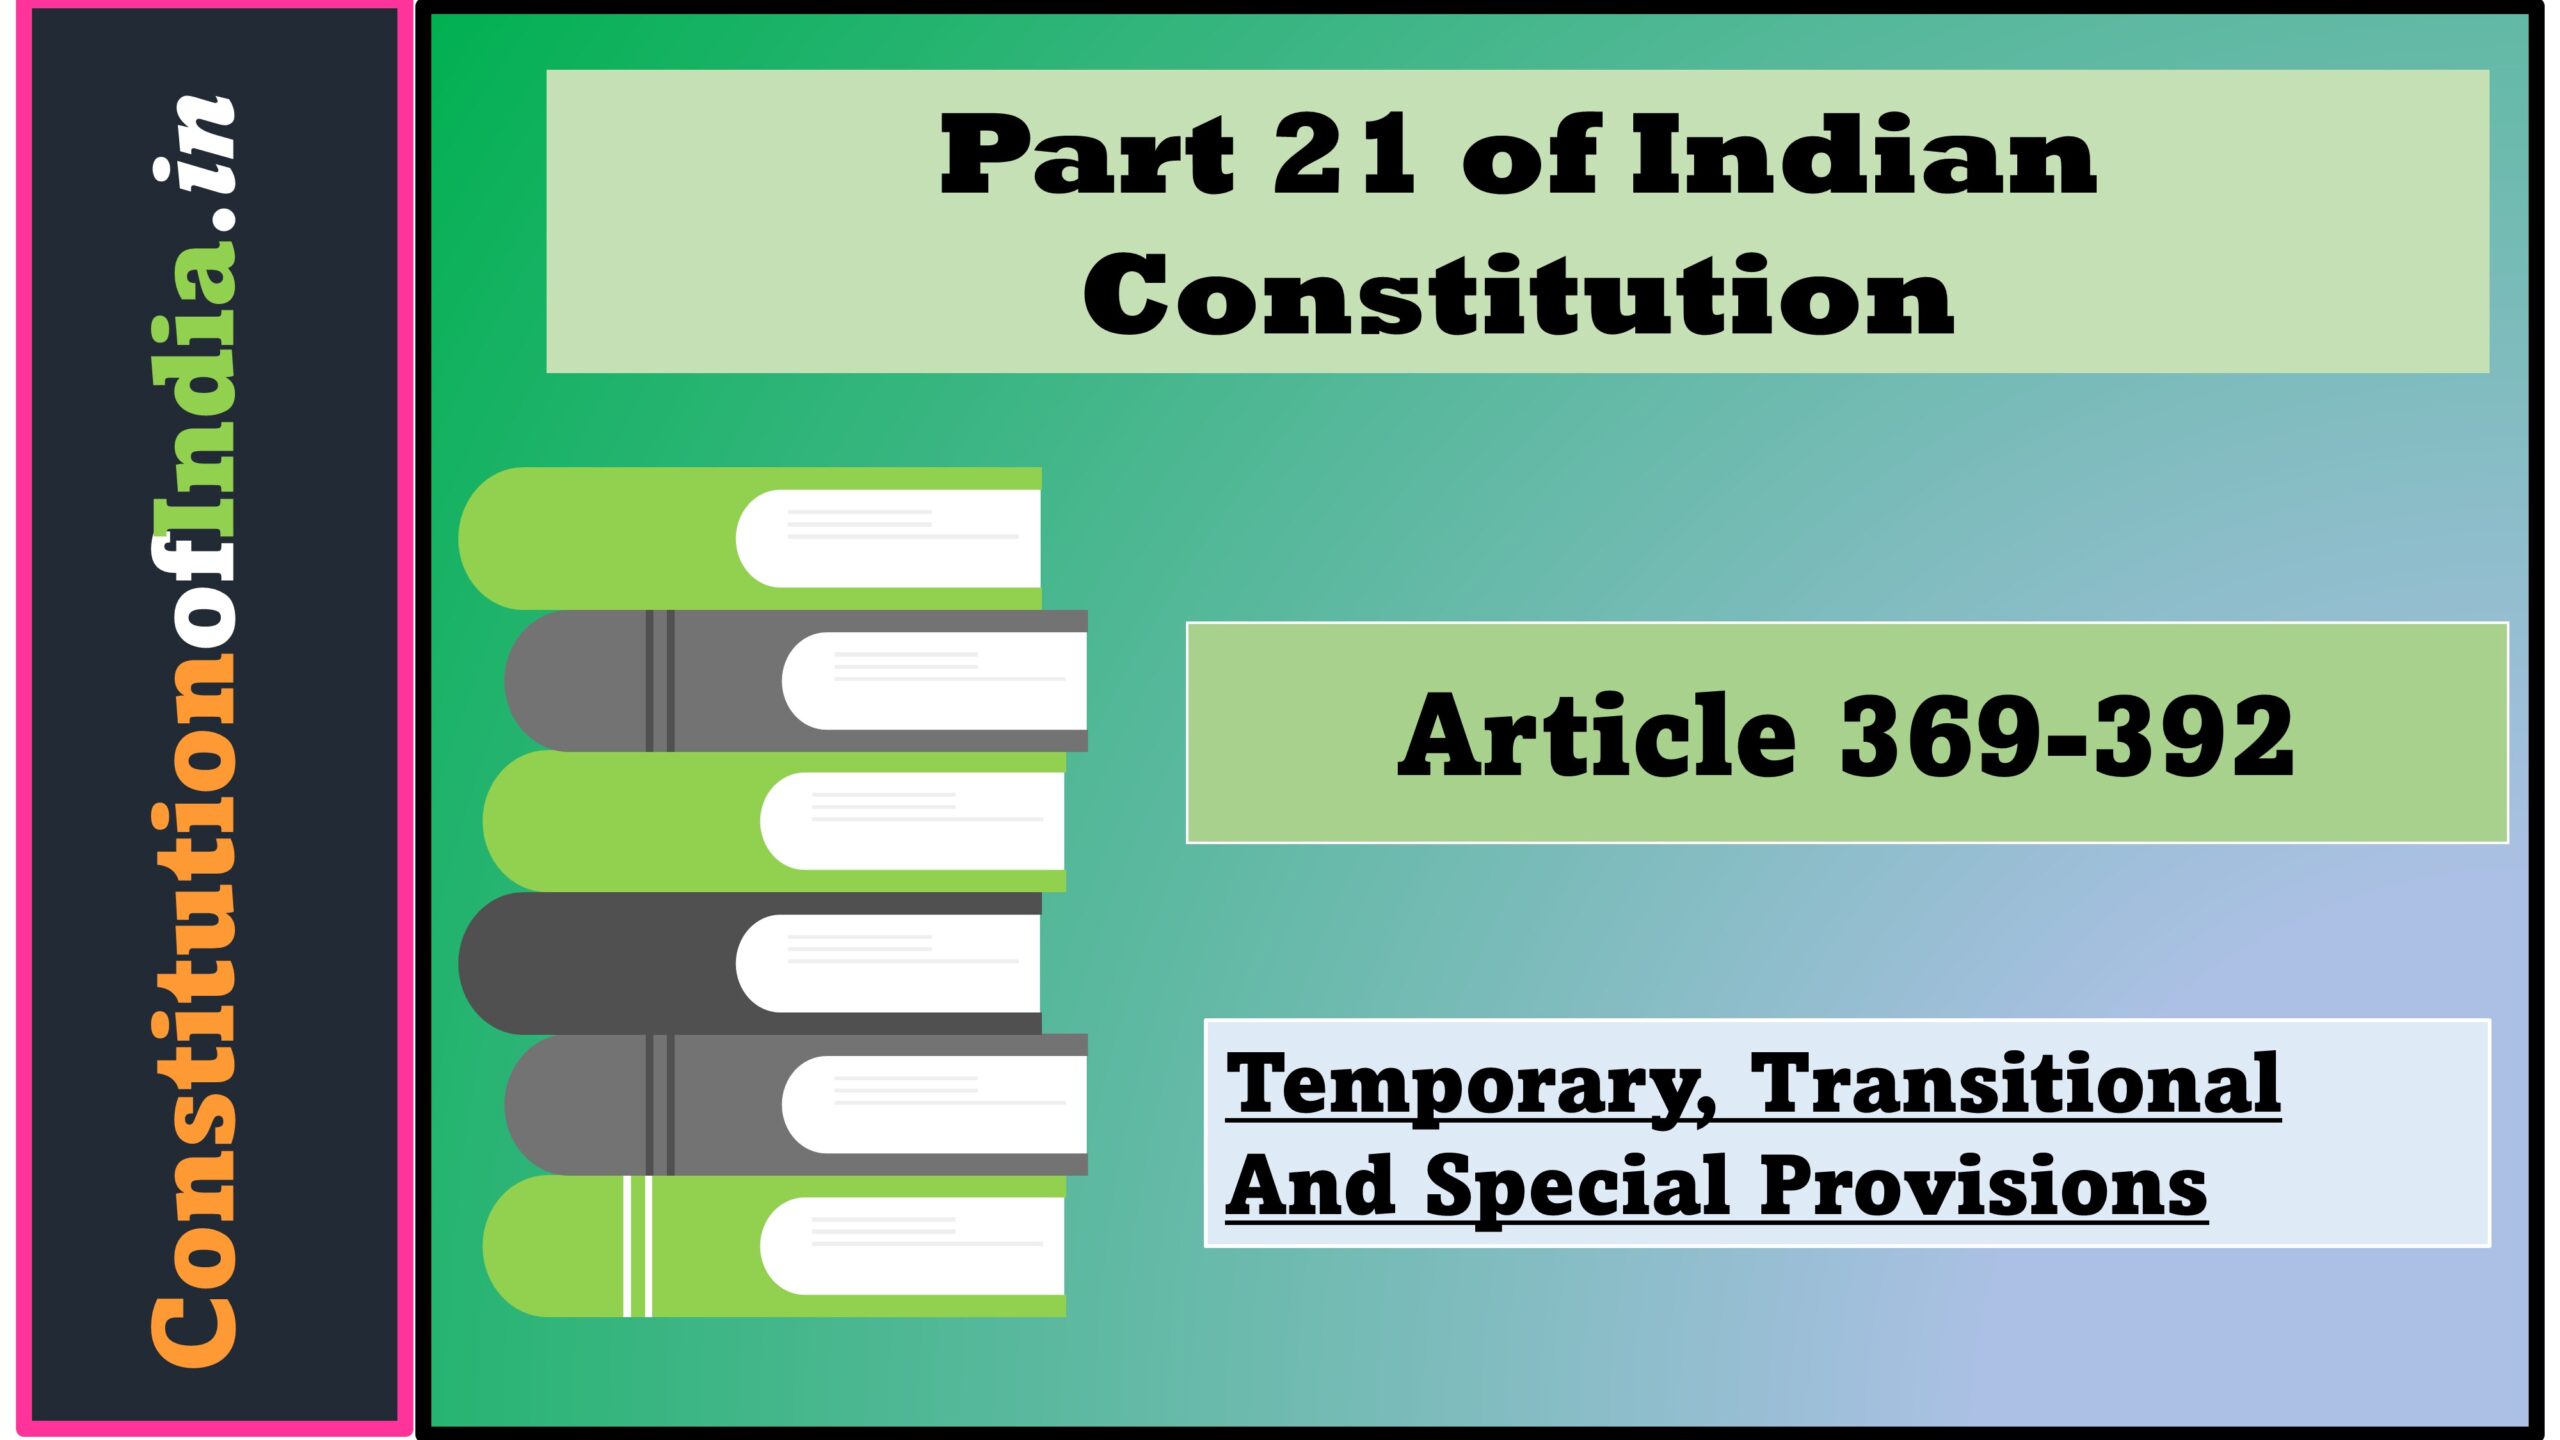 Part 21 of Indian Constitution